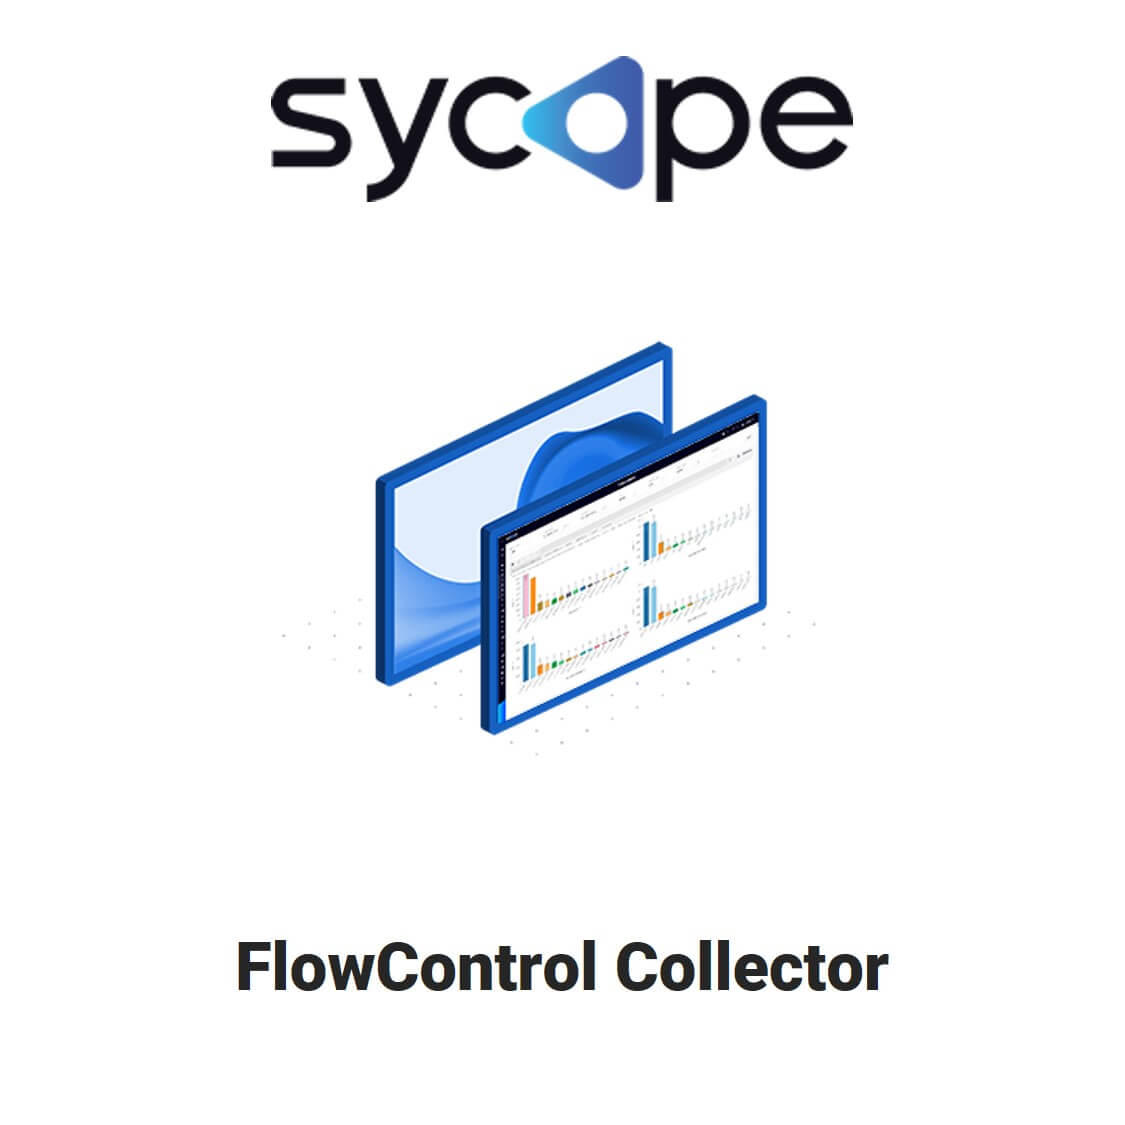 FlowControl Collector